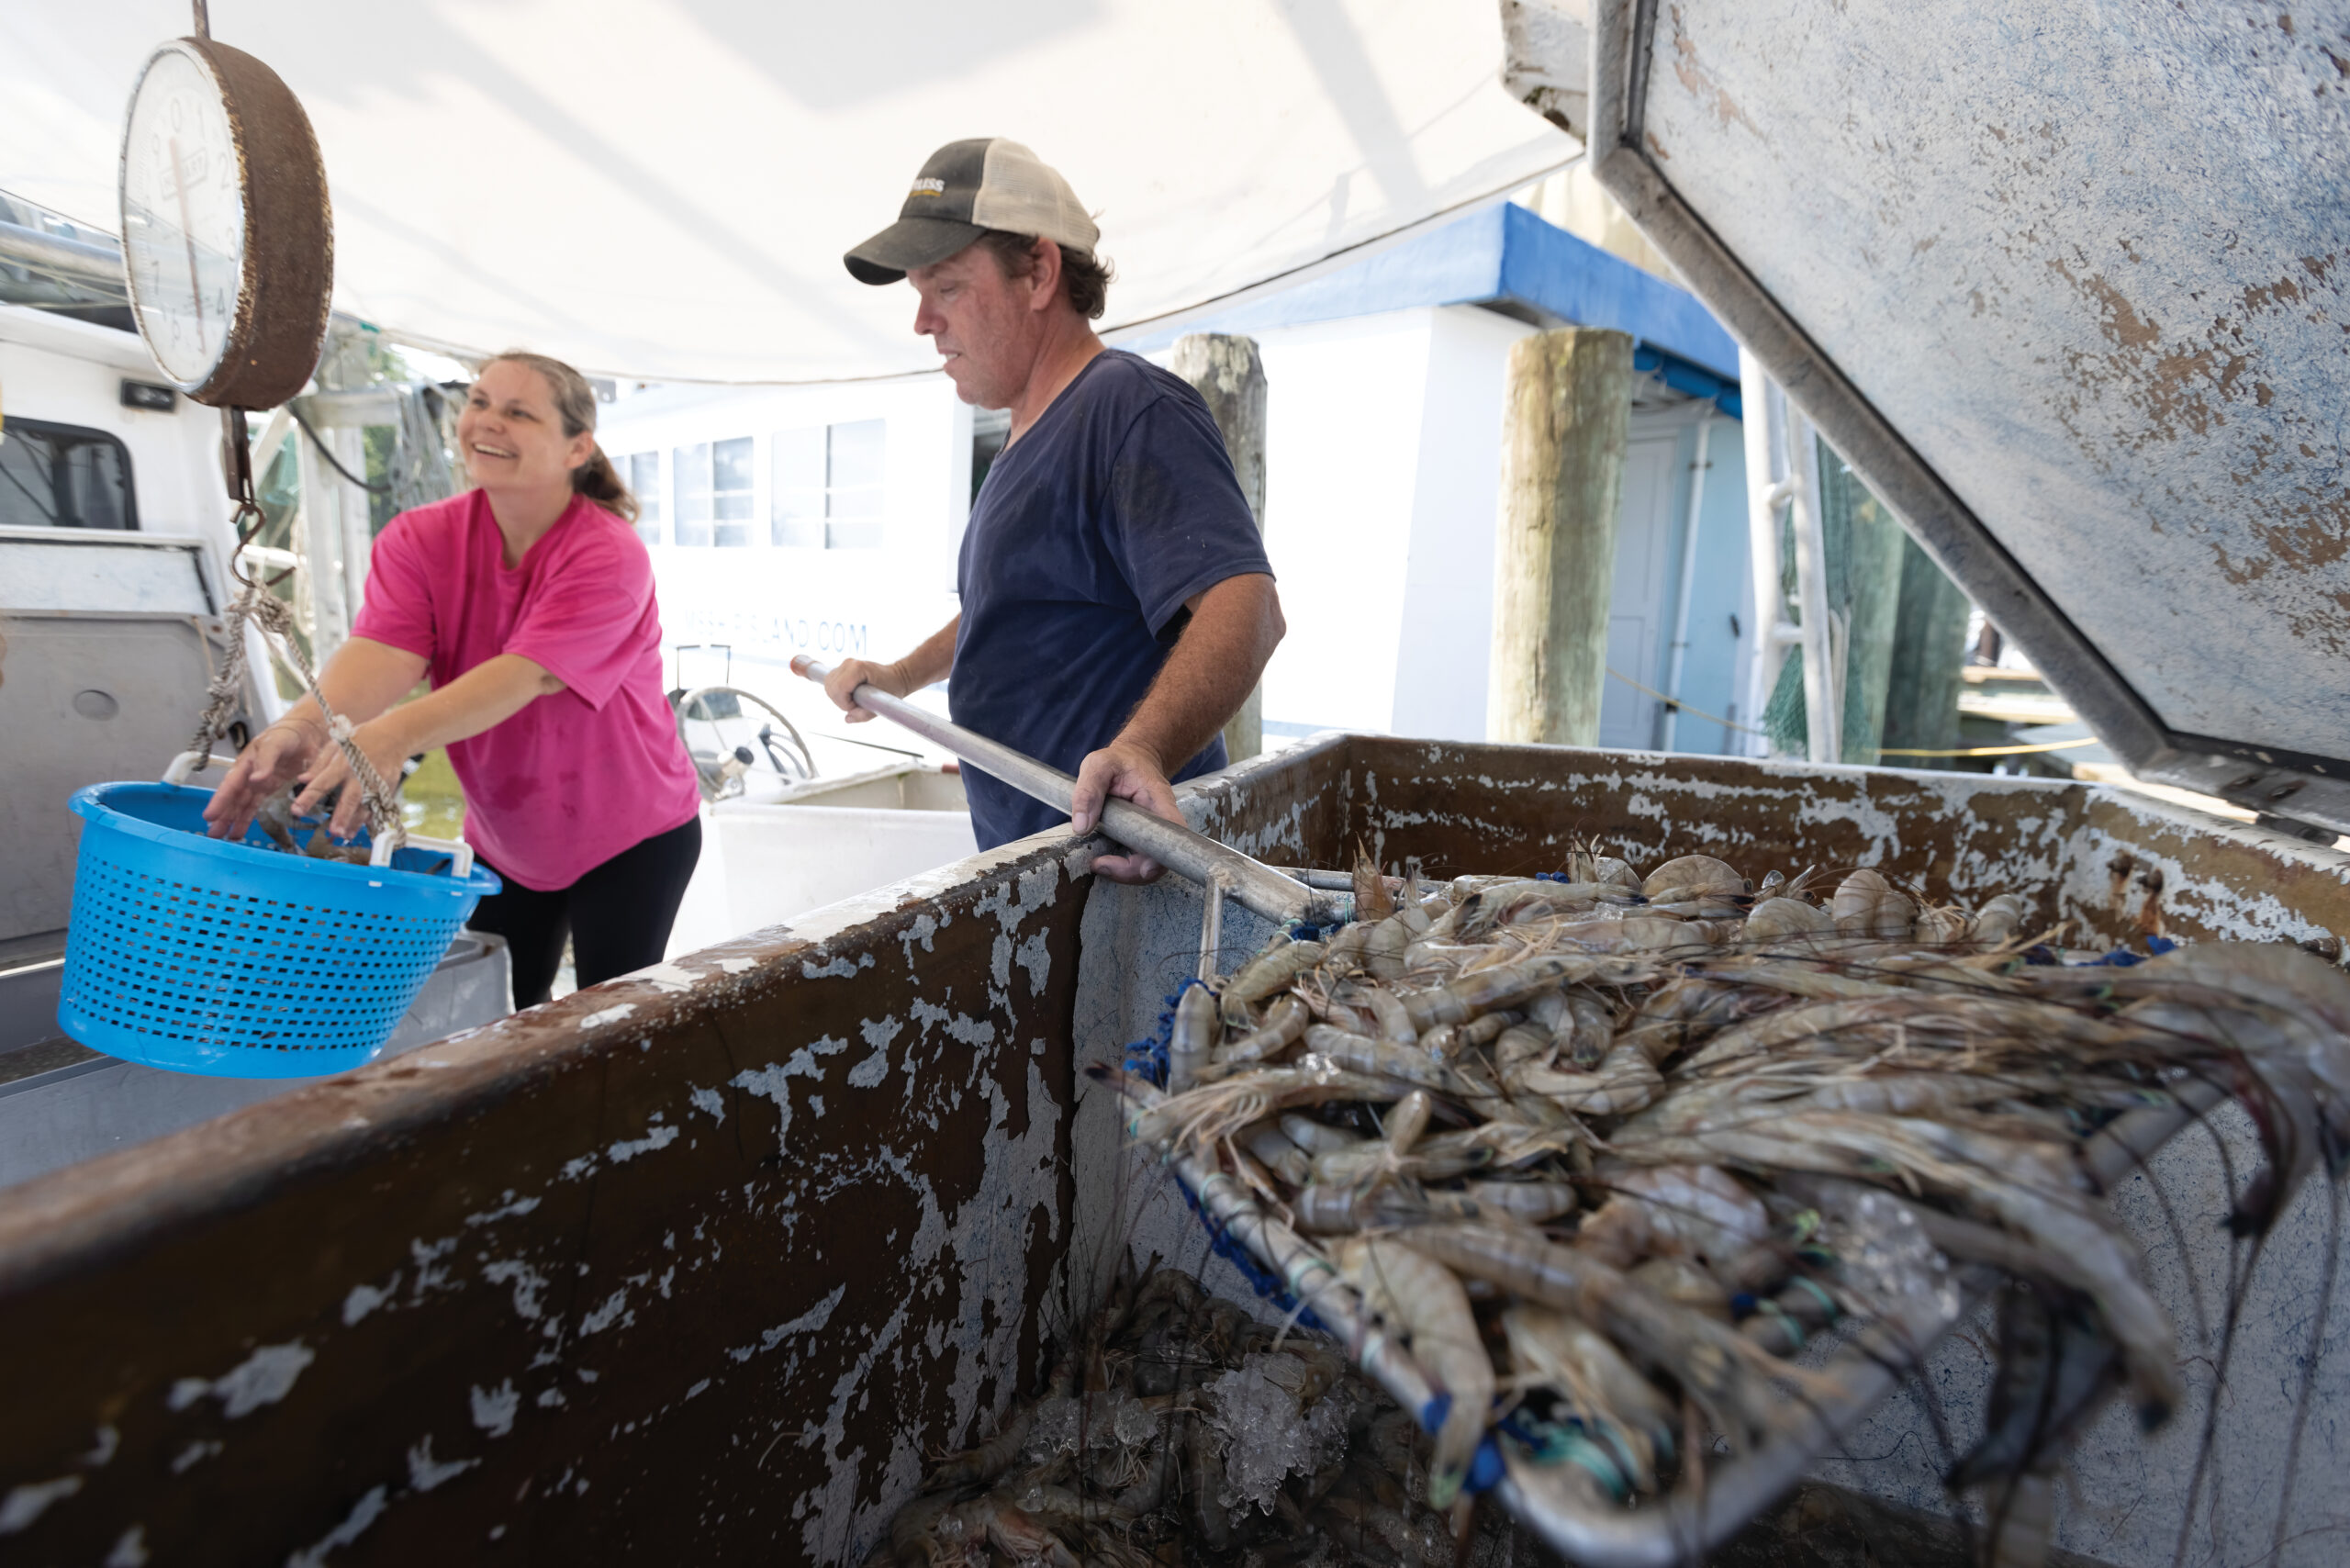 Franklin Parker of Fair Maiden Seafoods shovels freshly caught shrimp between coolers while his wife Becky weighs them while preparing orders for customers on the family boat in Ocean Springs, Mississippi.